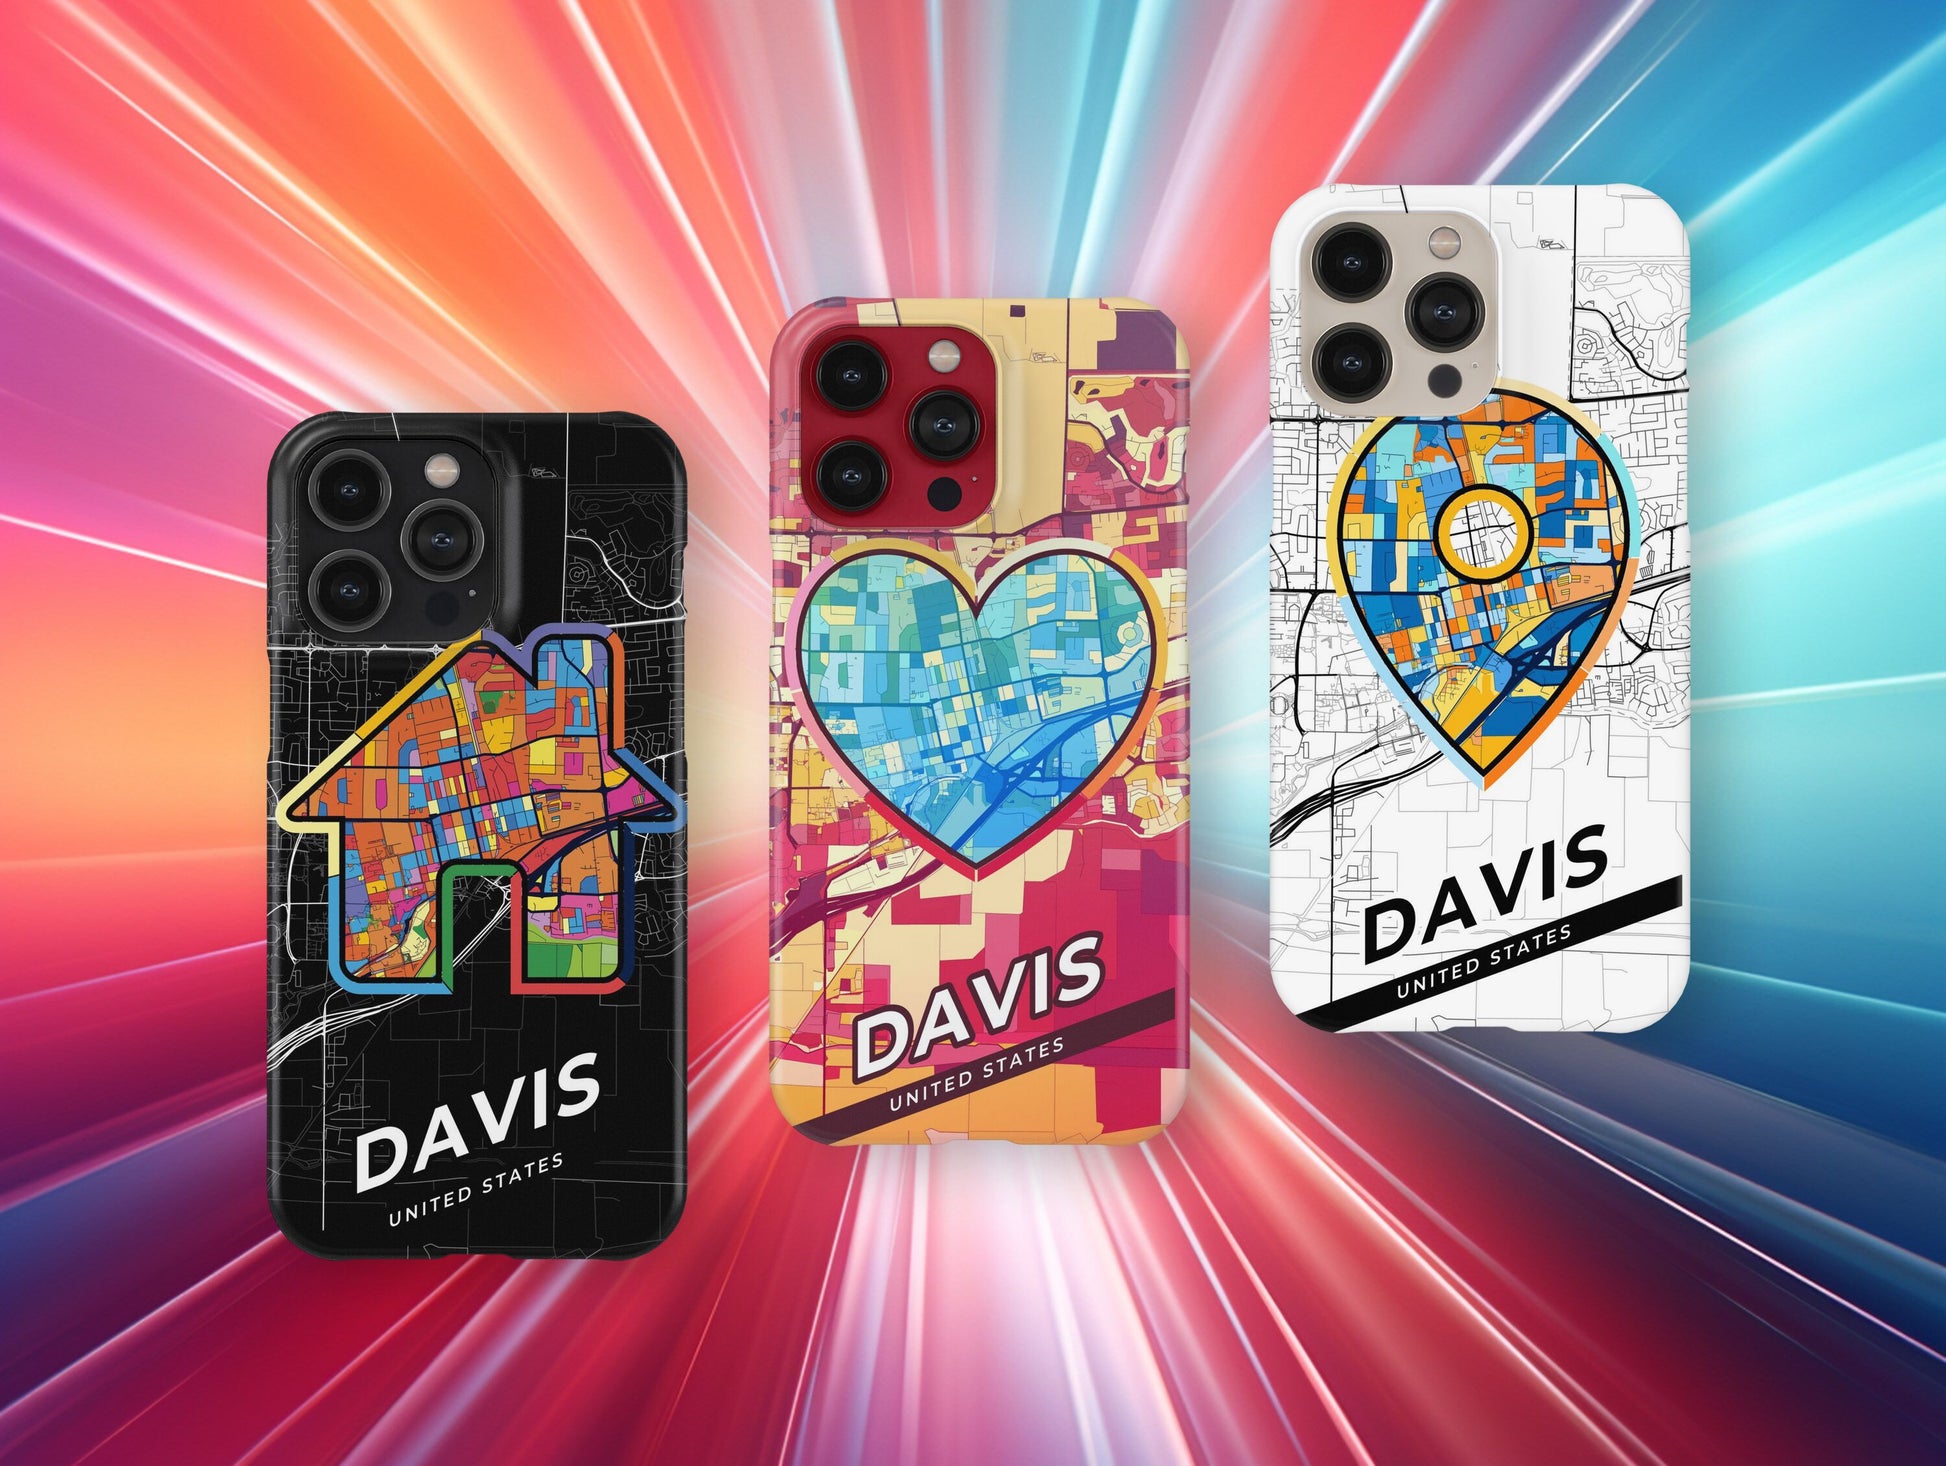 Davis California slim phone case with colorful icon. Birthday, wedding or housewarming gift. Couple match cases.